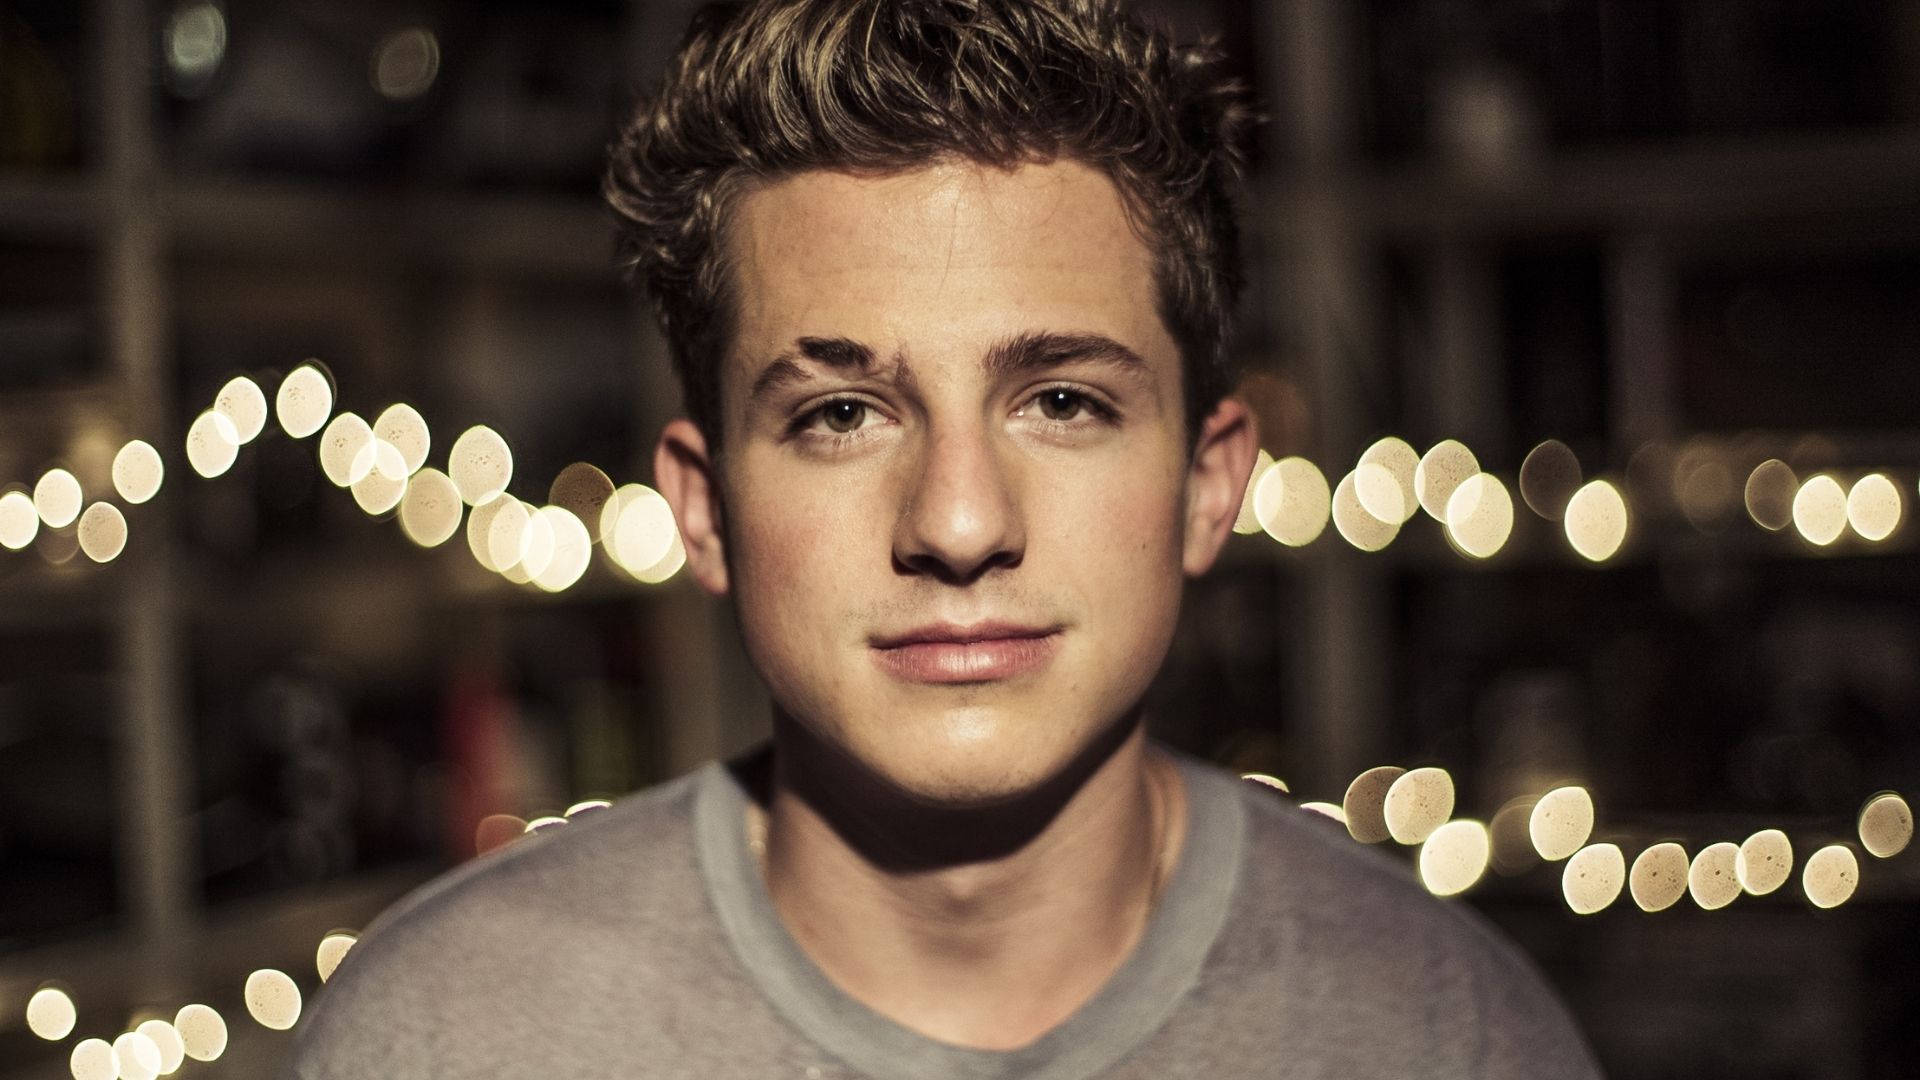 Charlie Puth Wallpaper Images